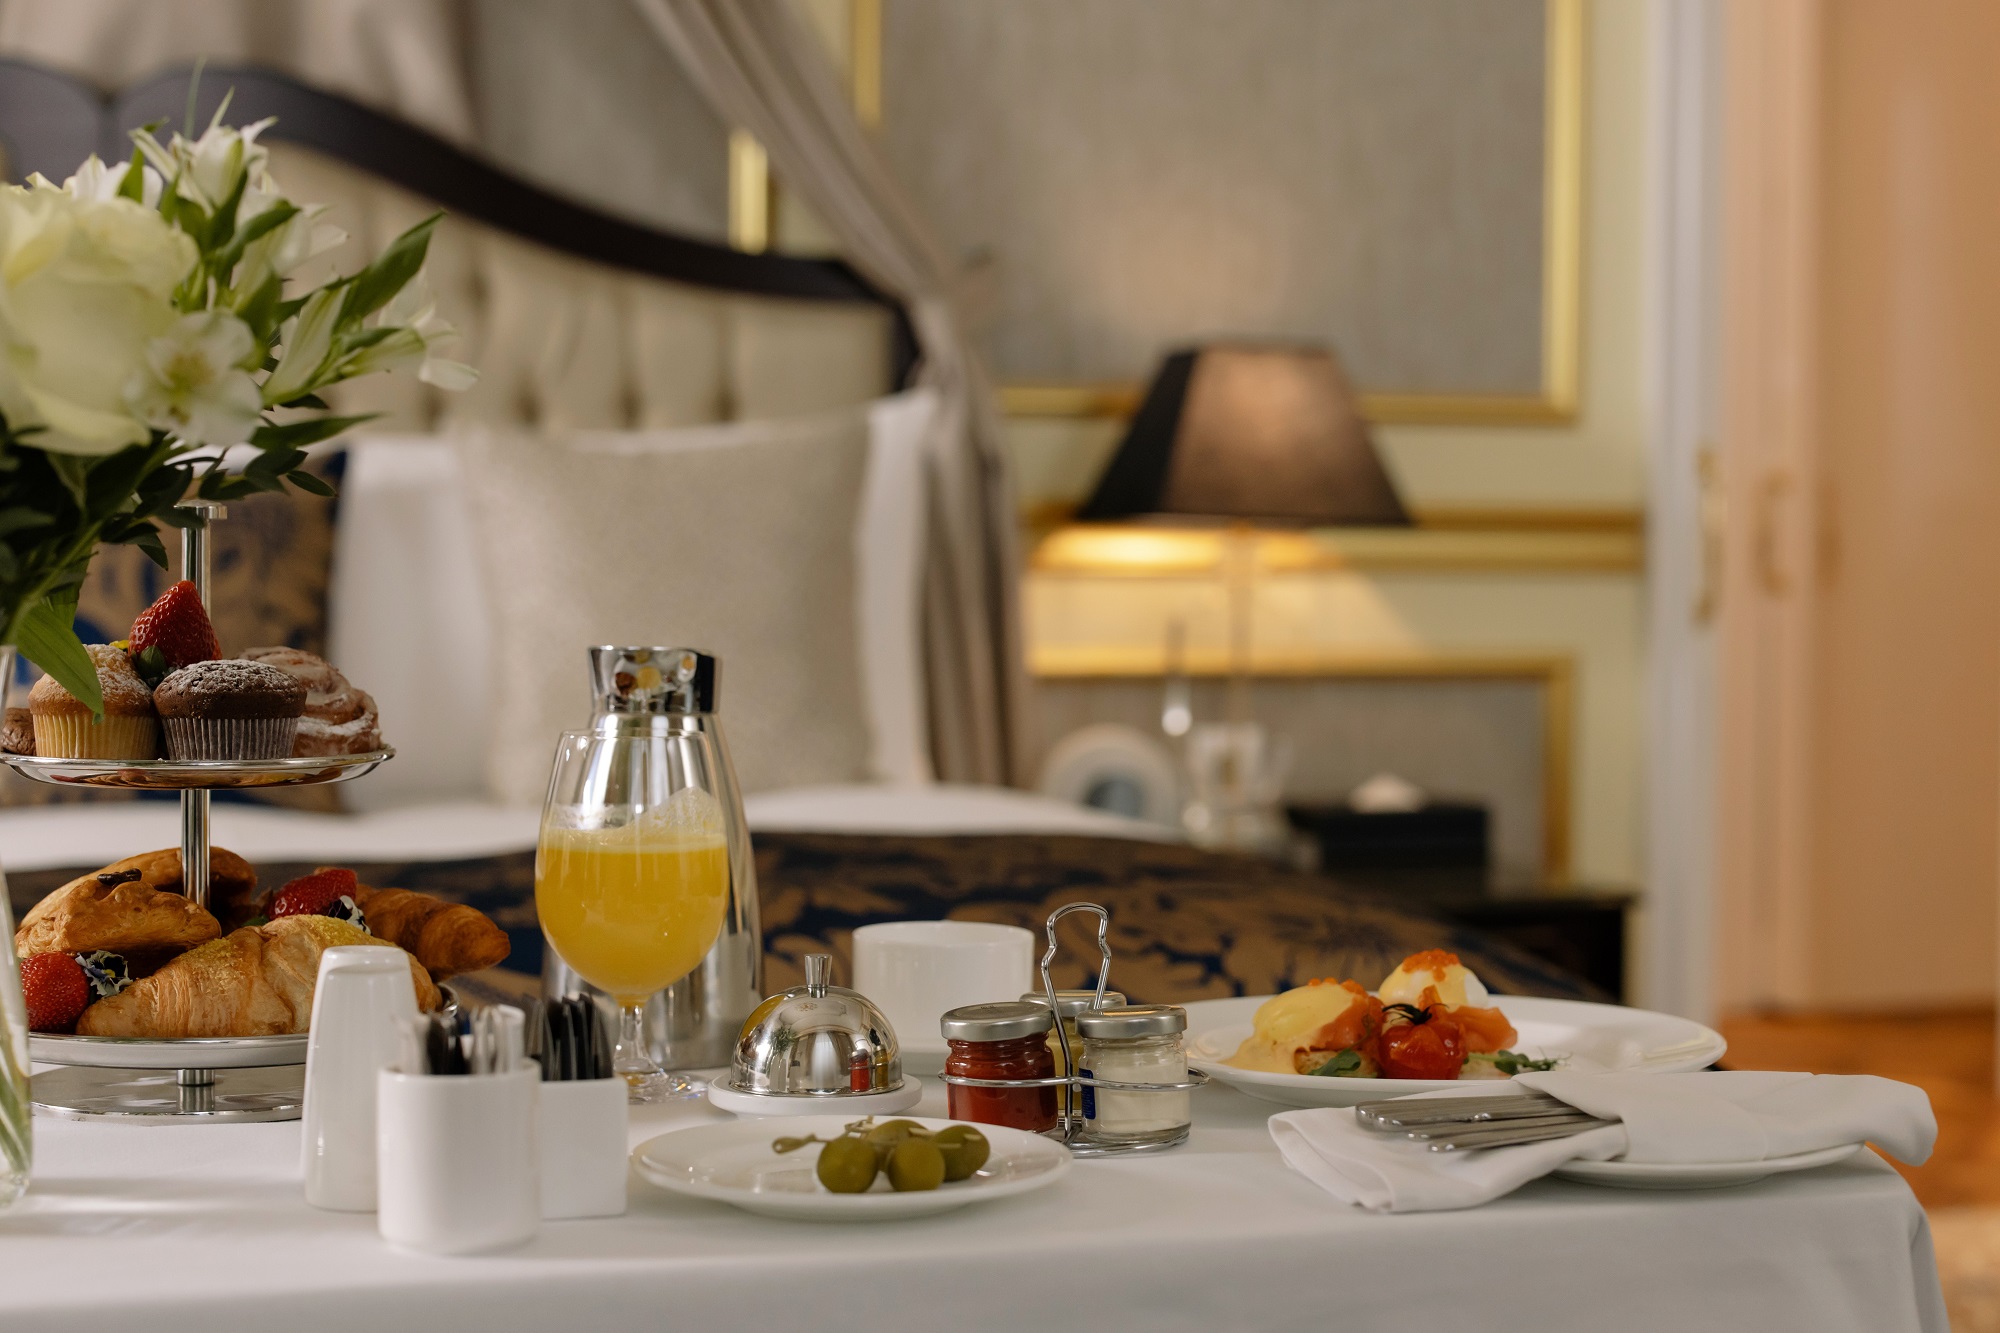 Ambiance: room service serves breakfast in a hotel